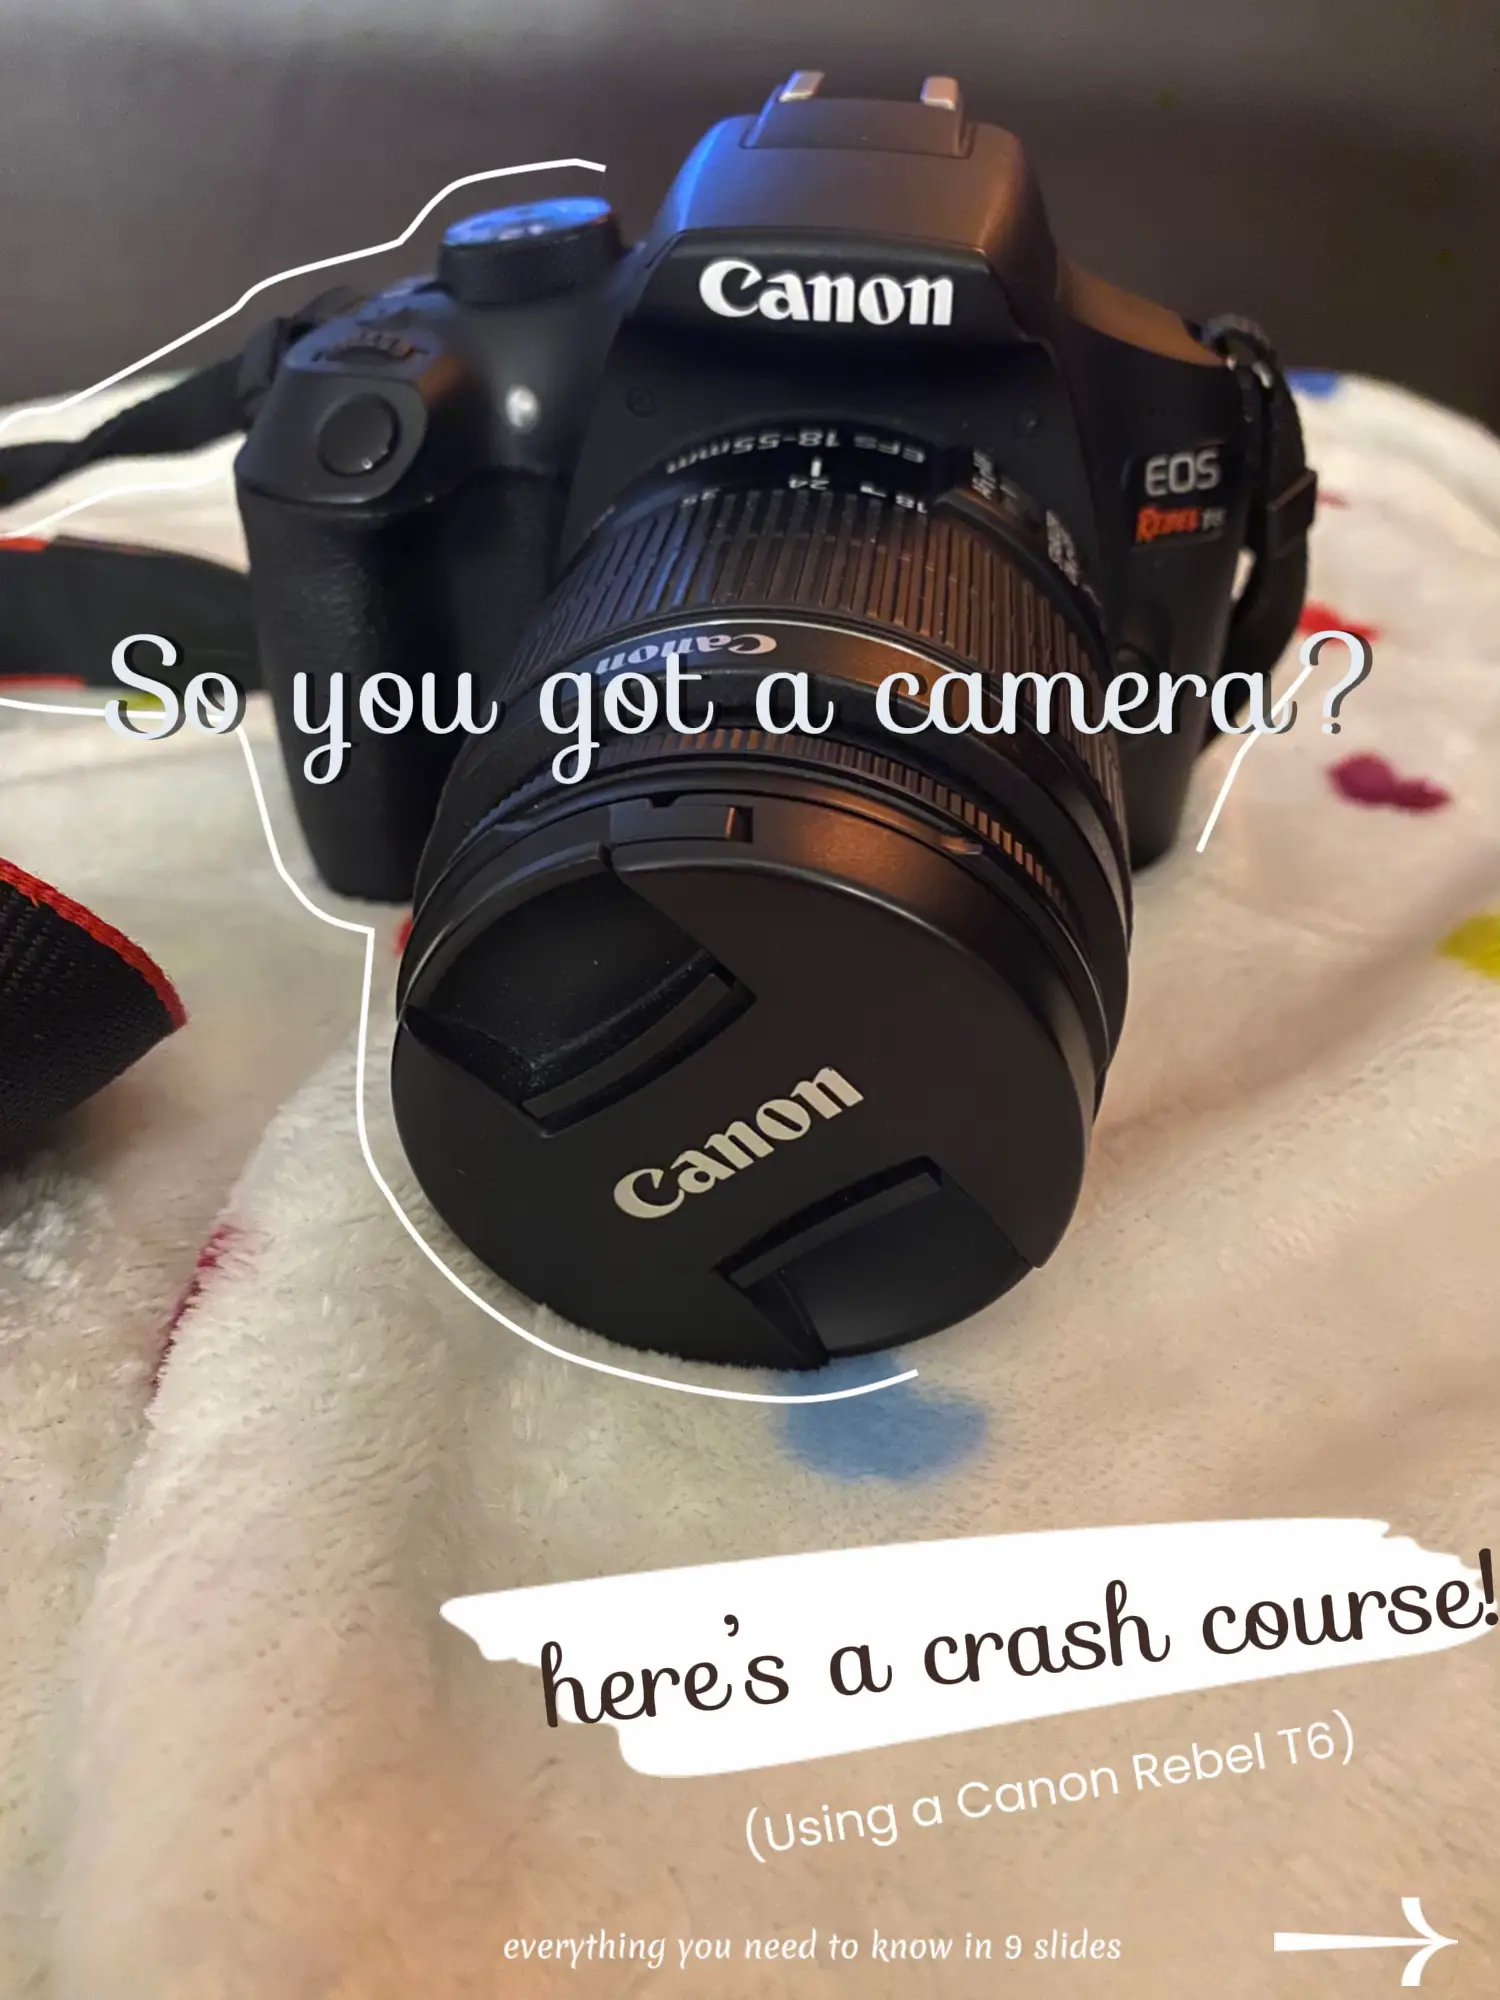 Hi! I am planning to sell my Canon g7x mark ii and buy the Canon EOS m200.  Would it bw a worthy upgrade considering the latter is cheaper than the g7x?  